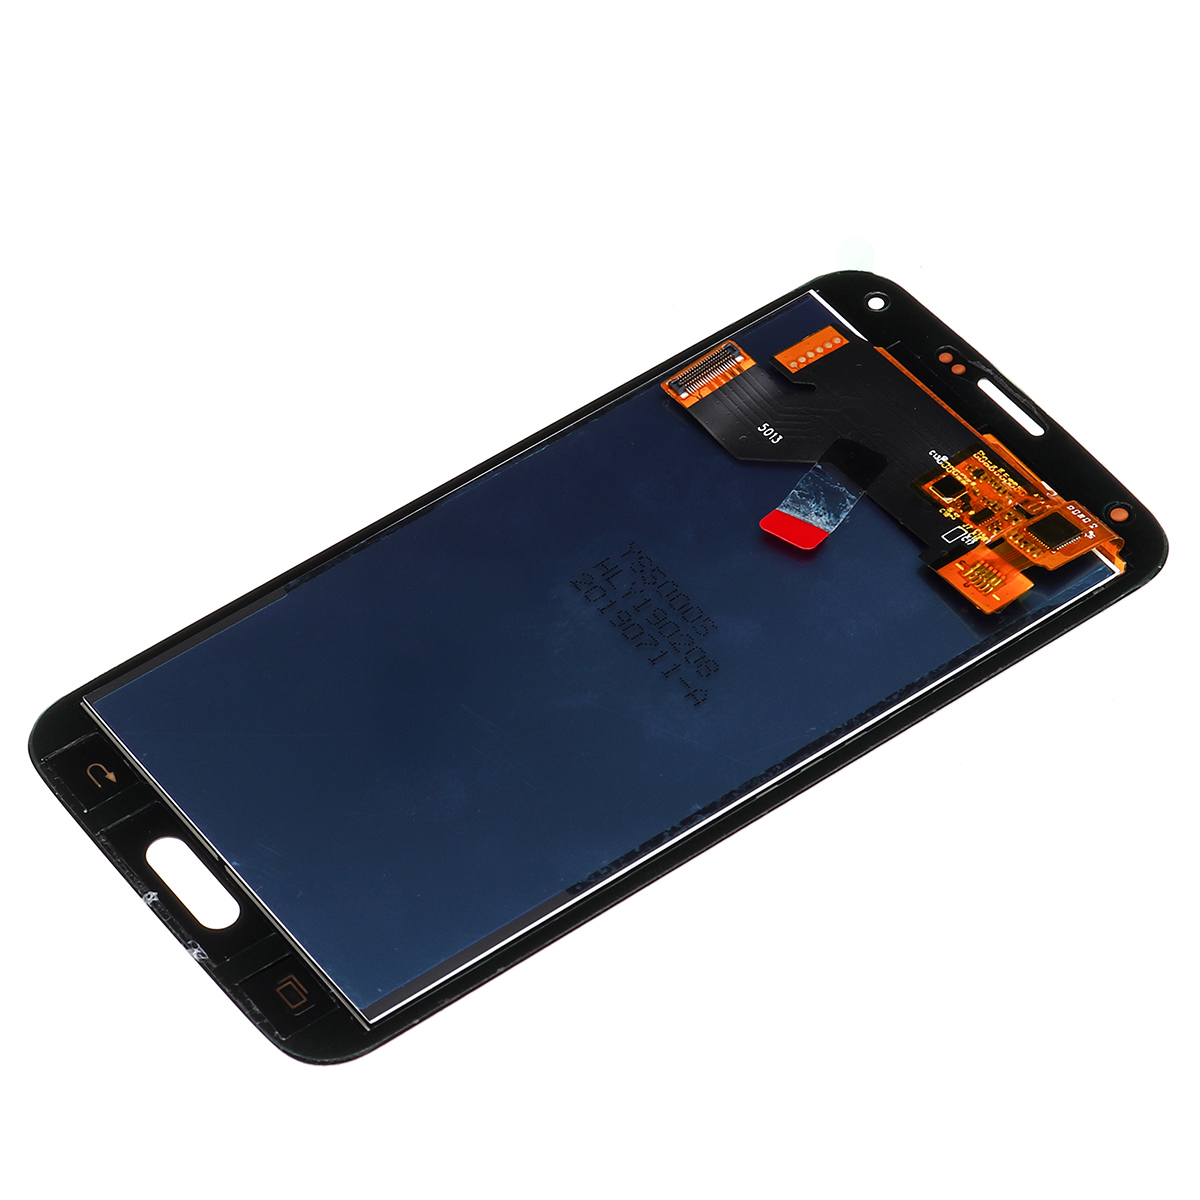 OLED-Display--Touch-Screen-Digitizer-Screen-Replacement-With-Repair-Tools-For-Samsung-Galaxy-S5-G900-1558993-7